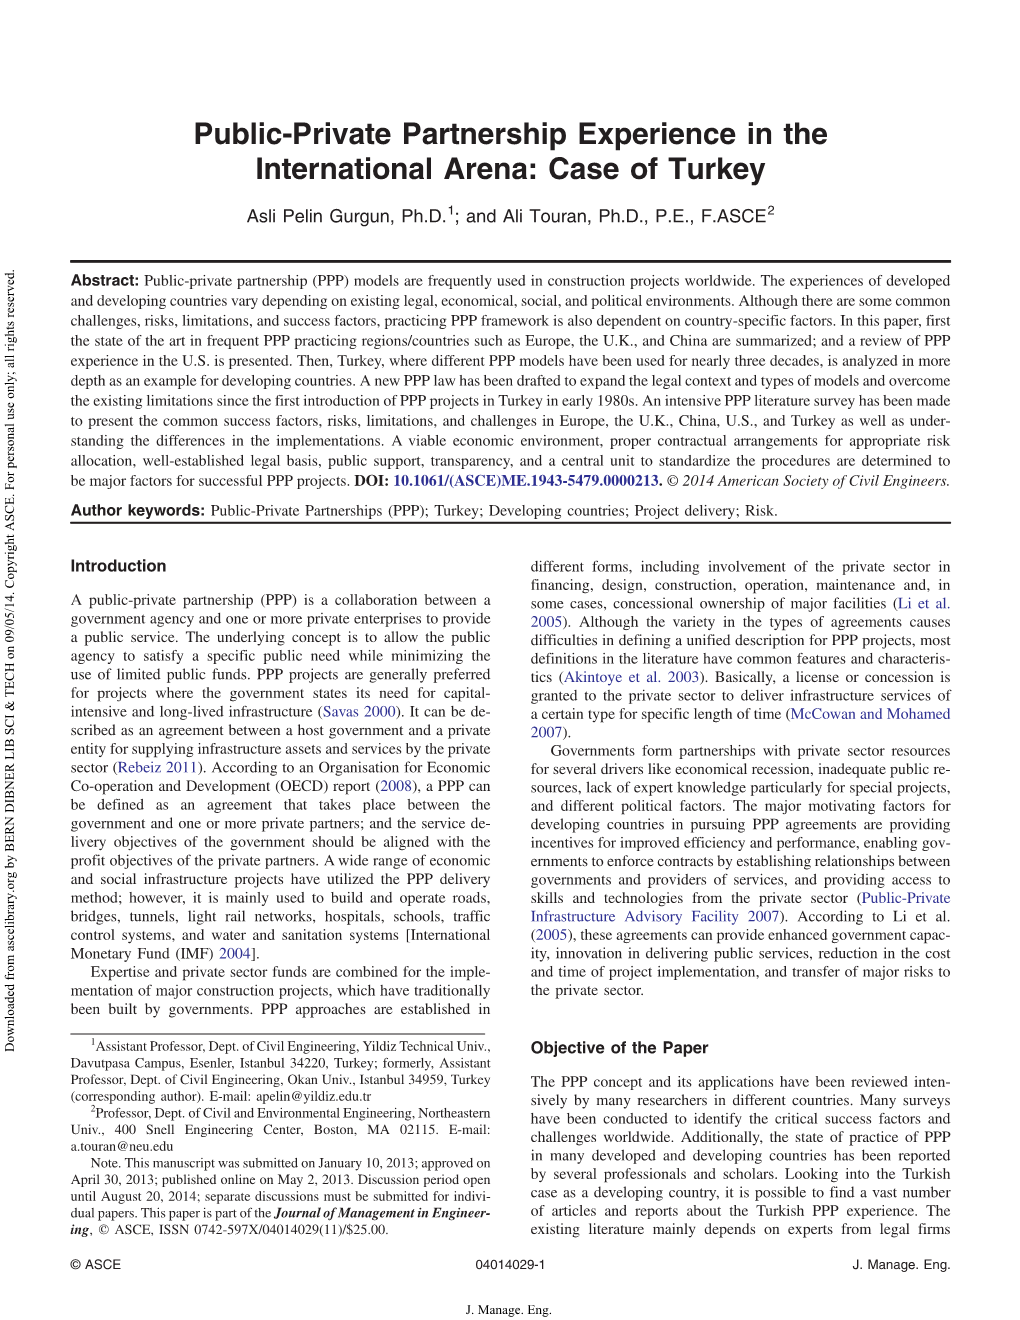 Public-Private Partnership Experience in the International Arena: Case of Turkey